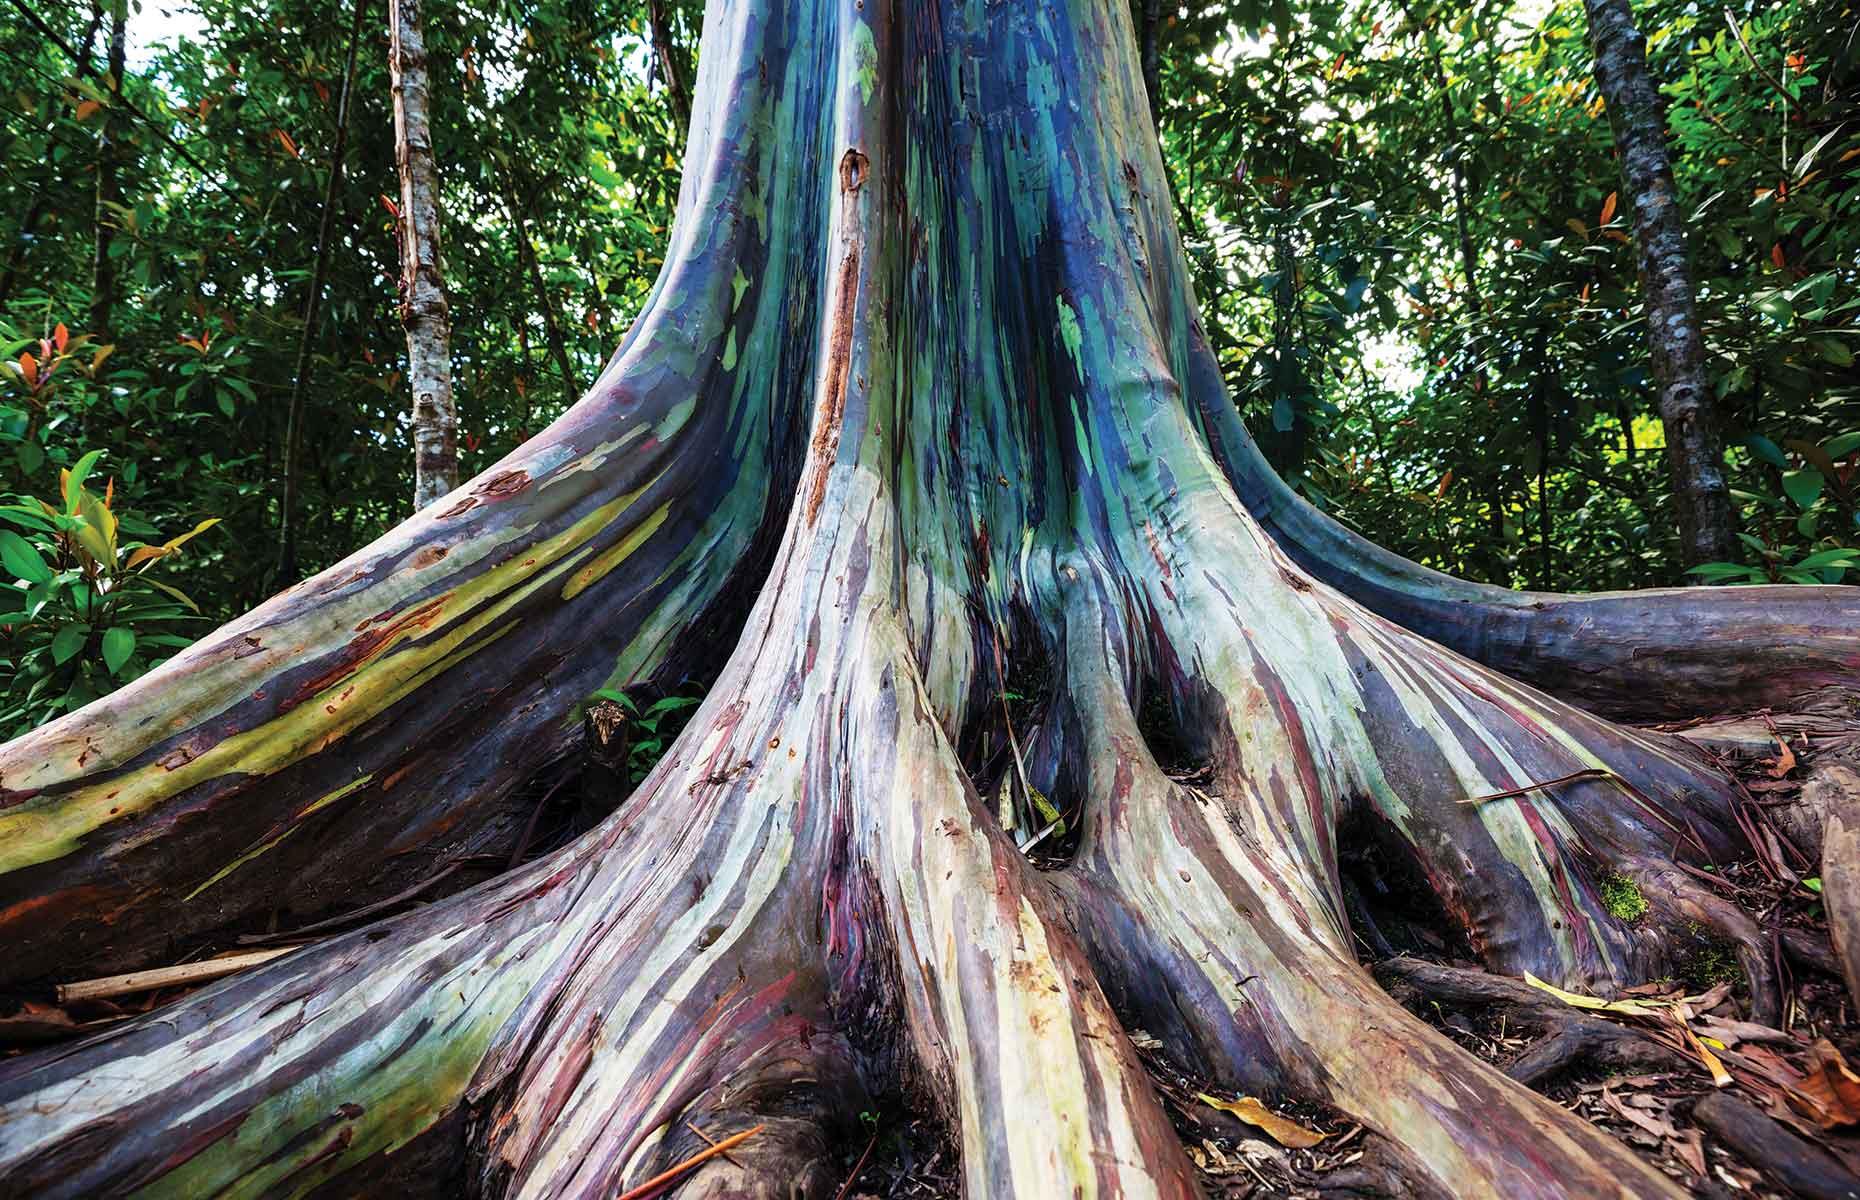 <p>The only eucalyptus species to grow in rainforests, the rainbow eucalyptus is native to Indonesia, the Philippines and New Guinea. It's also grown in plantations for pulpwood used in making paper. </p>  <p><a href="https://www.loveexploring.com/galleries/110689/ranked-americas-most-beautiful-national-forests?page=1"><strong>These are America's most beautiful national forests</strong></a></p>